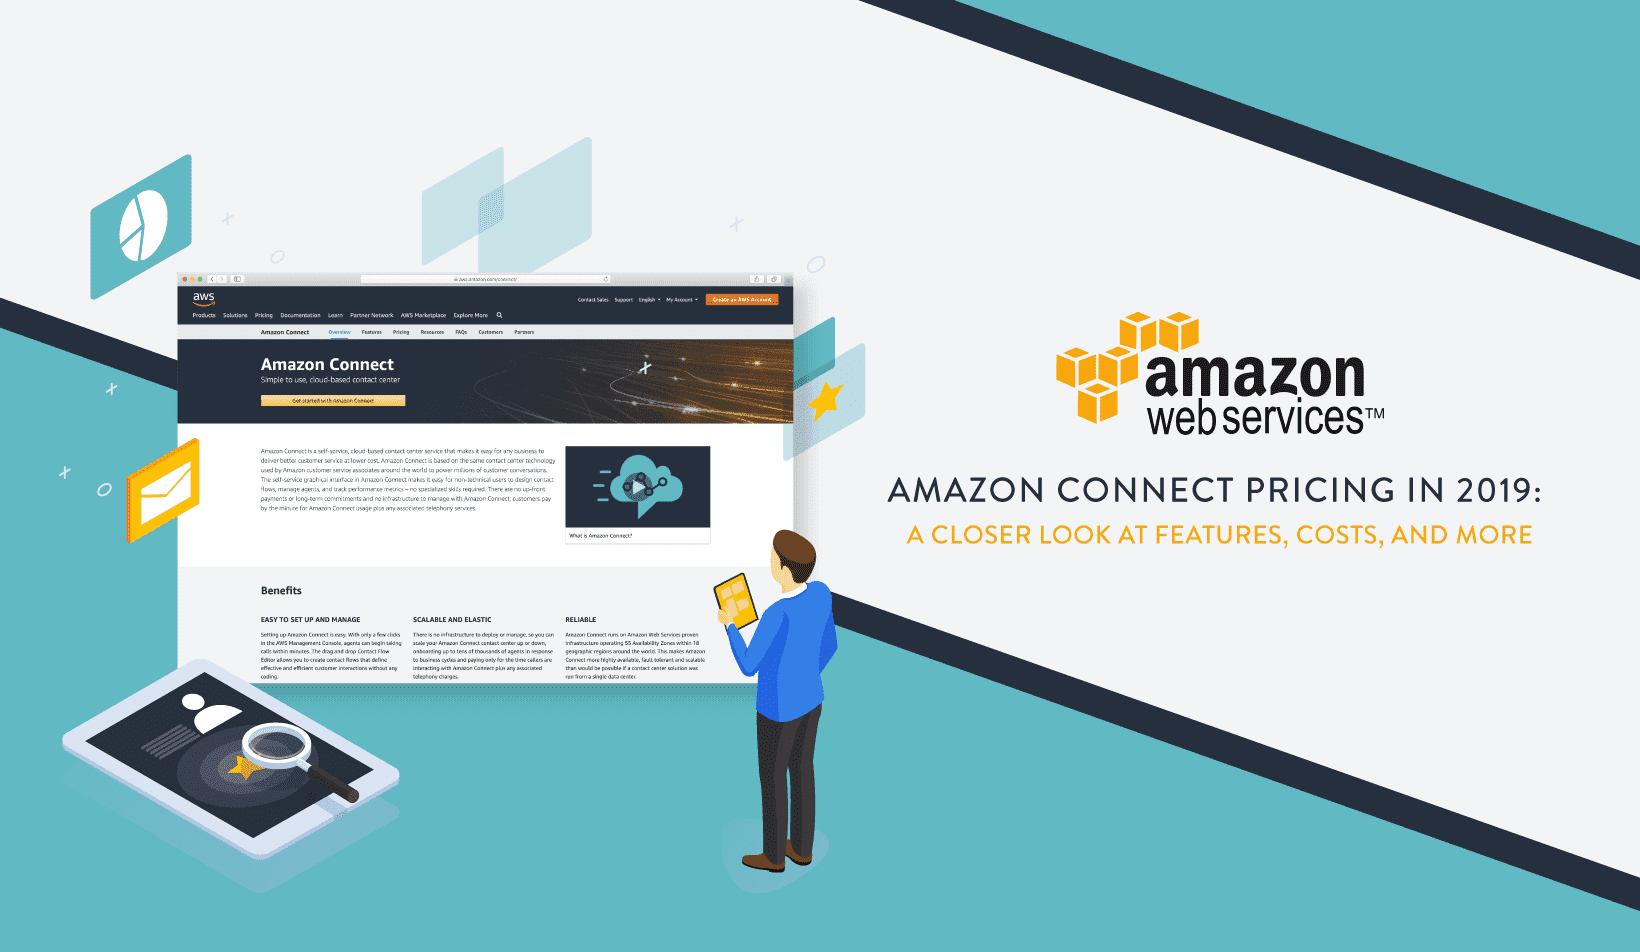 Amazon Connect Pricing in 2019: A Closer Look at Features, Costs, and More